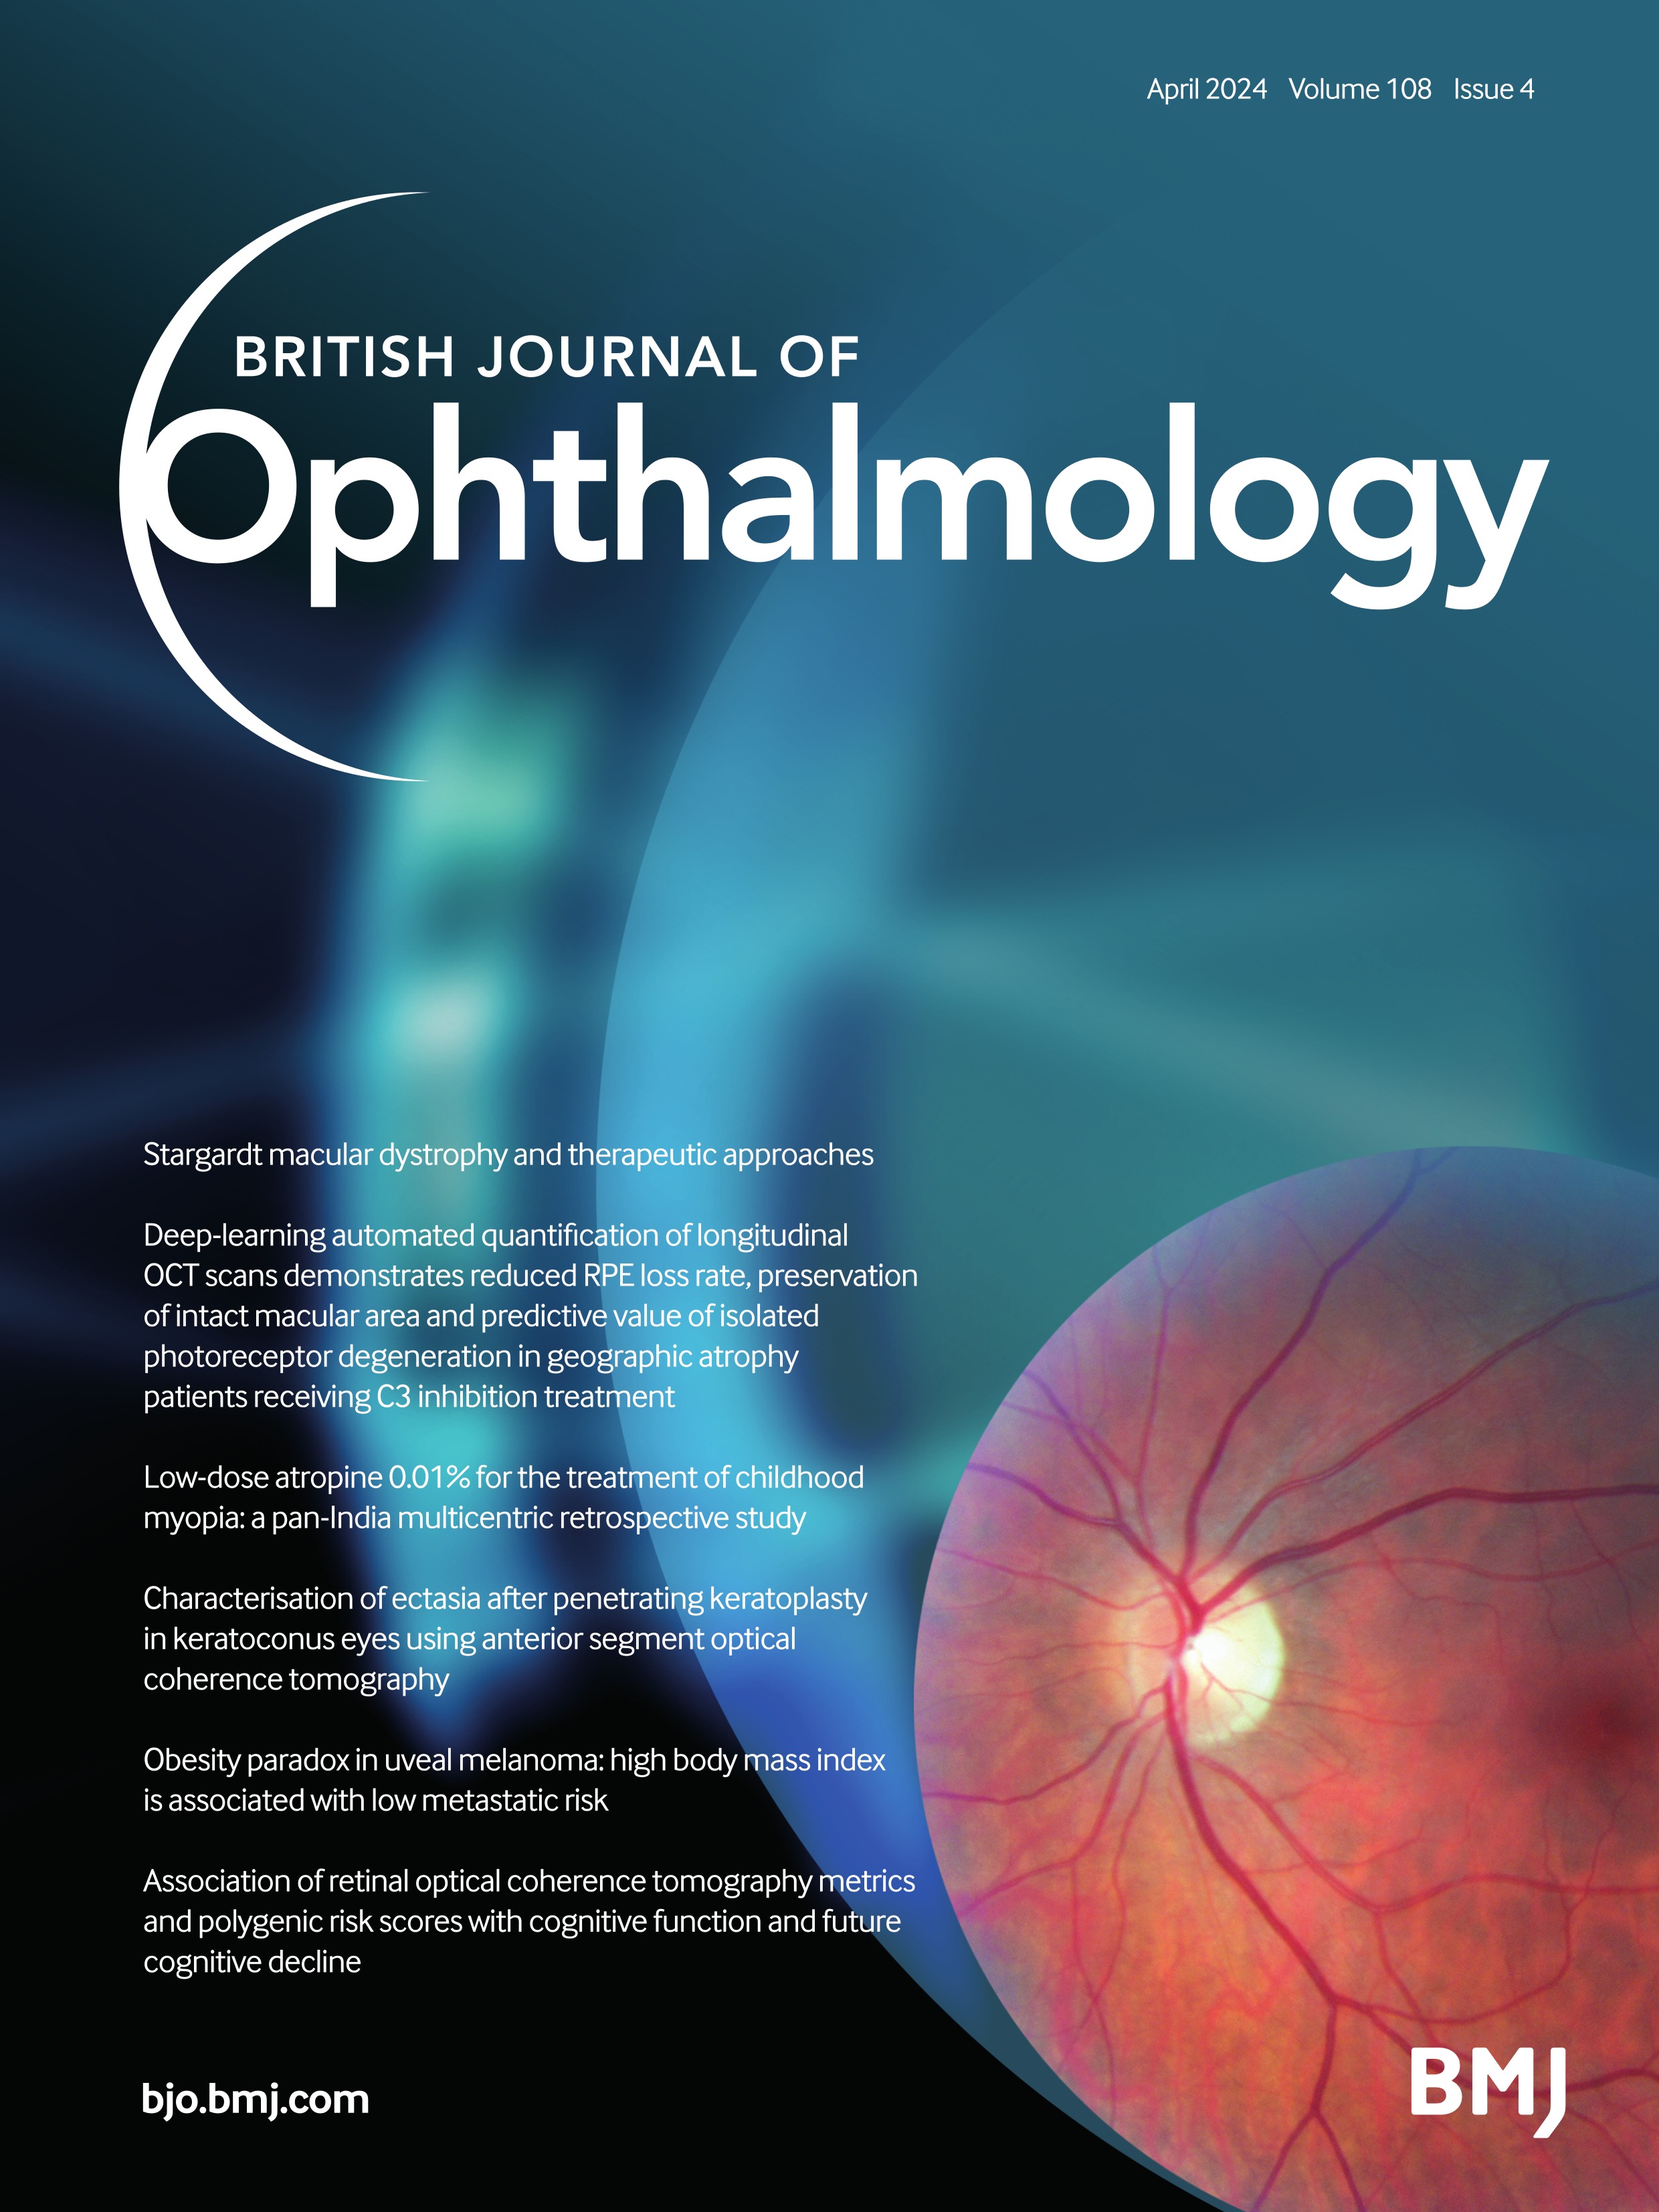 Fundus topographical distribution patterns of ocular toxoplasmosis